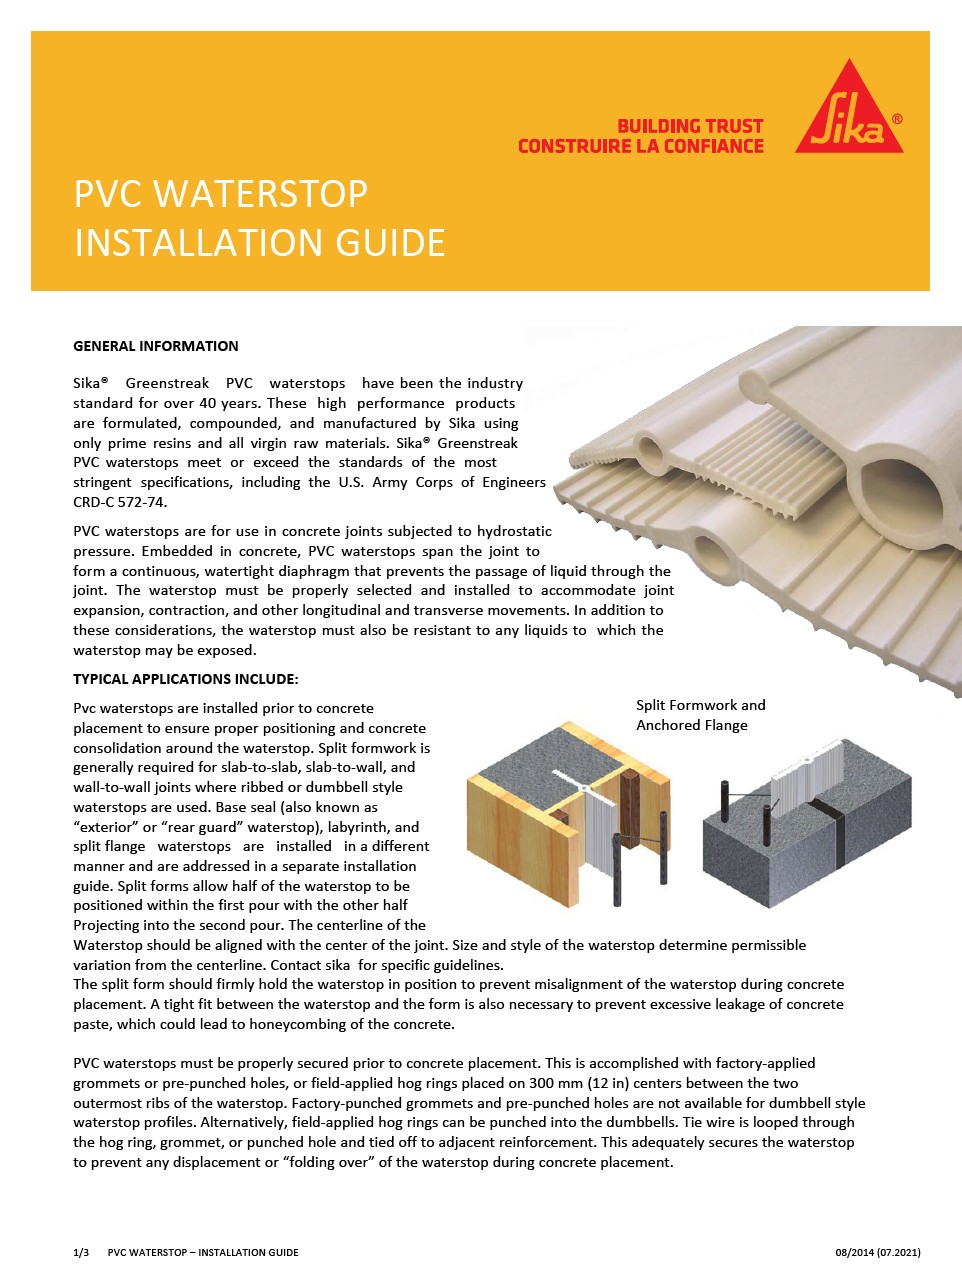 Installation Guide - PVC Waterstop